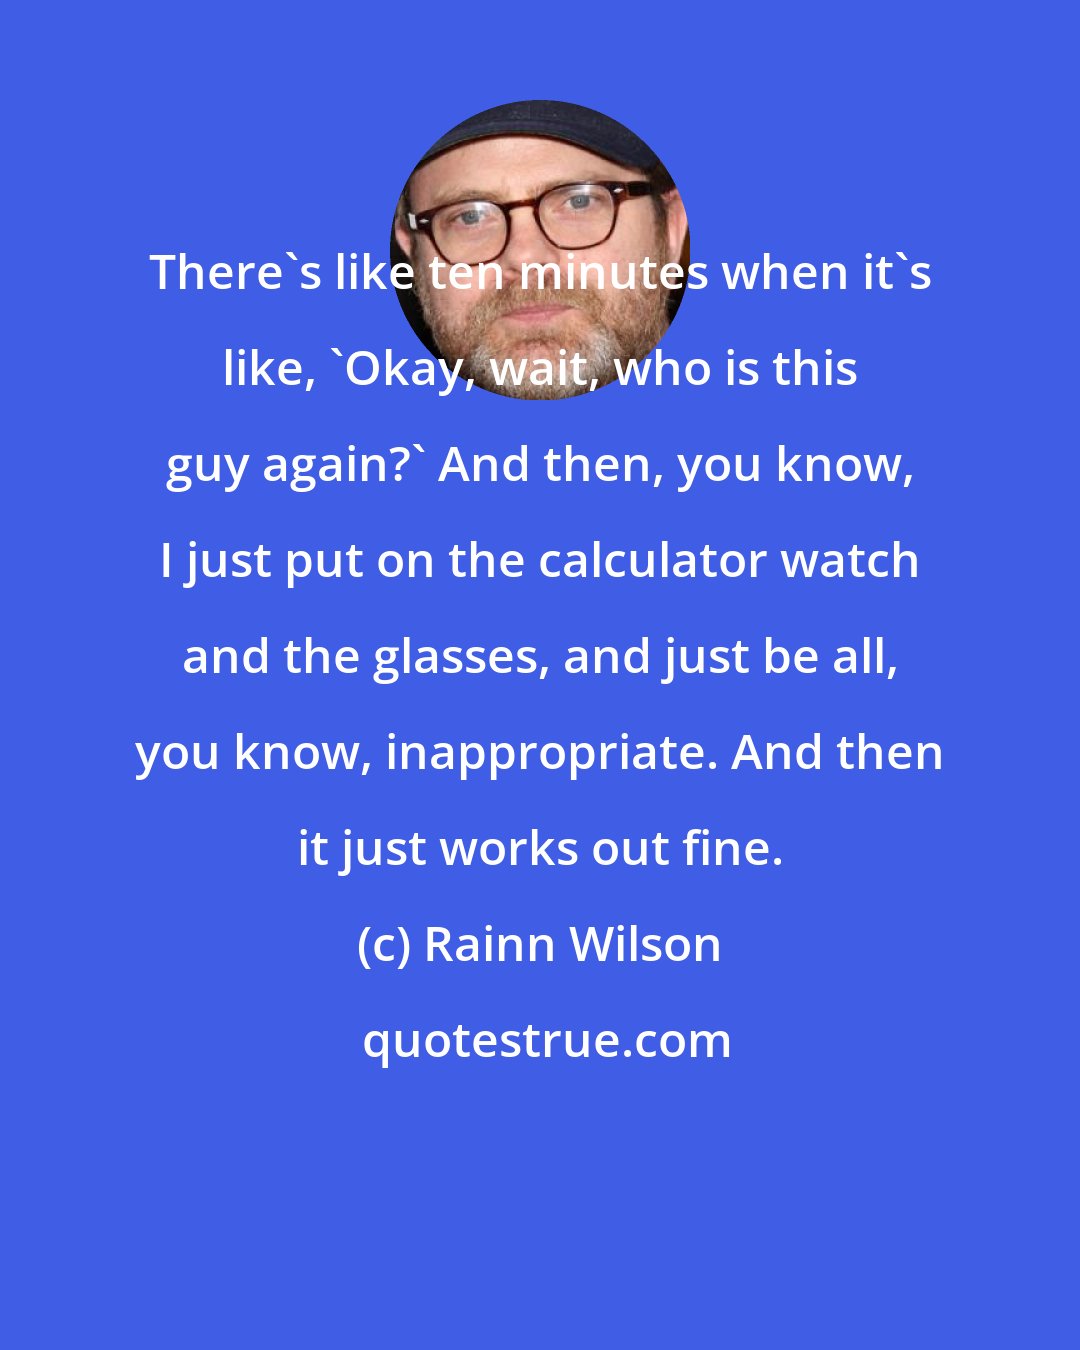 Rainn Wilson: There's like ten minutes when it's like, 'Okay, wait, who is this guy again?' And then, you know, I just put on the calculator watch and the glasses, and just be all, you know, inappropriate. And then it just works out fine.